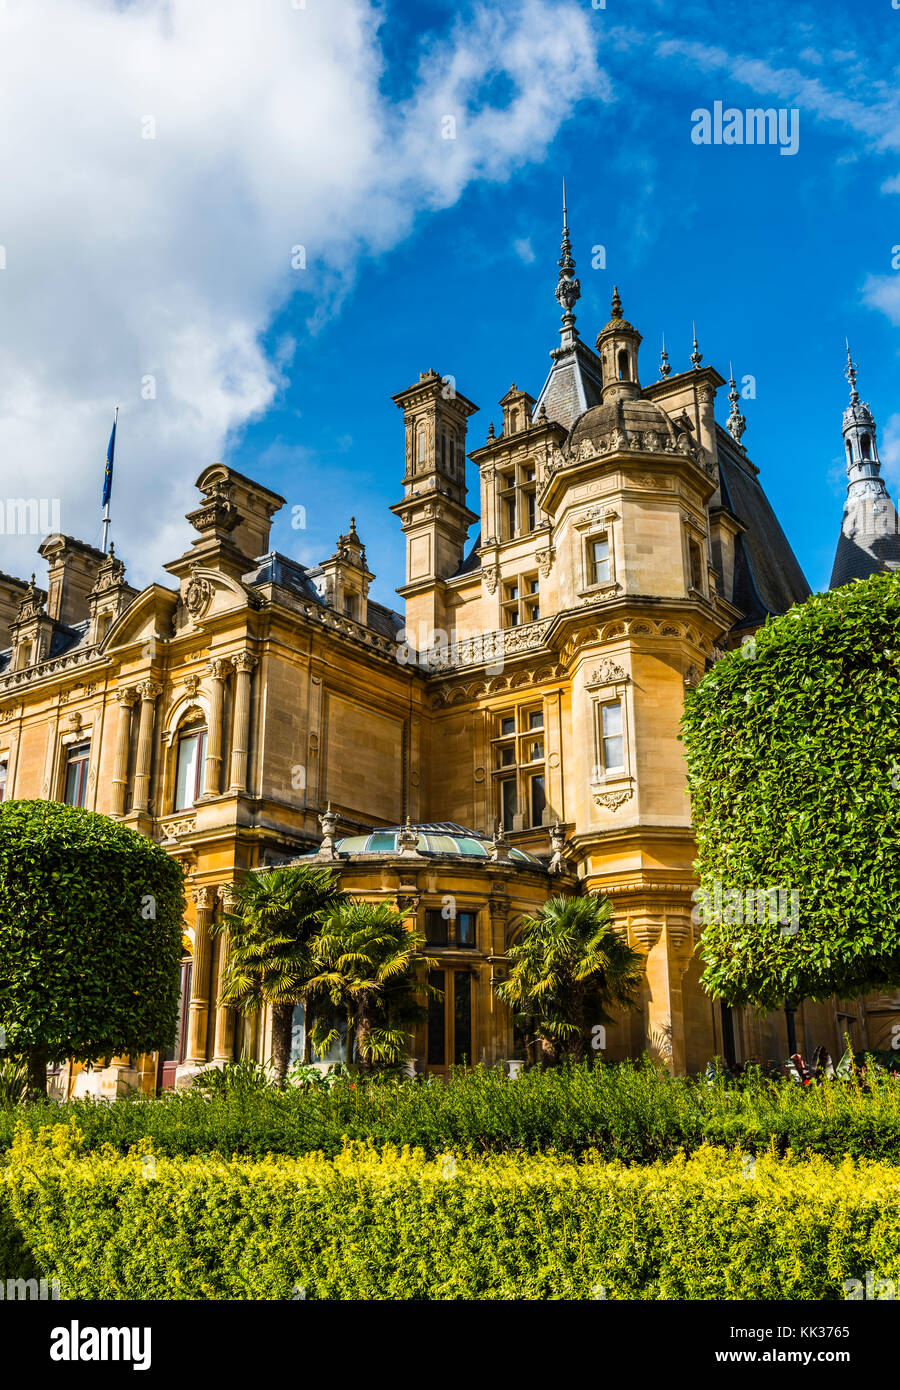 Details of the French-style chateau at Waddesdon Manor, Buckinghamshire, UK Stock Photo